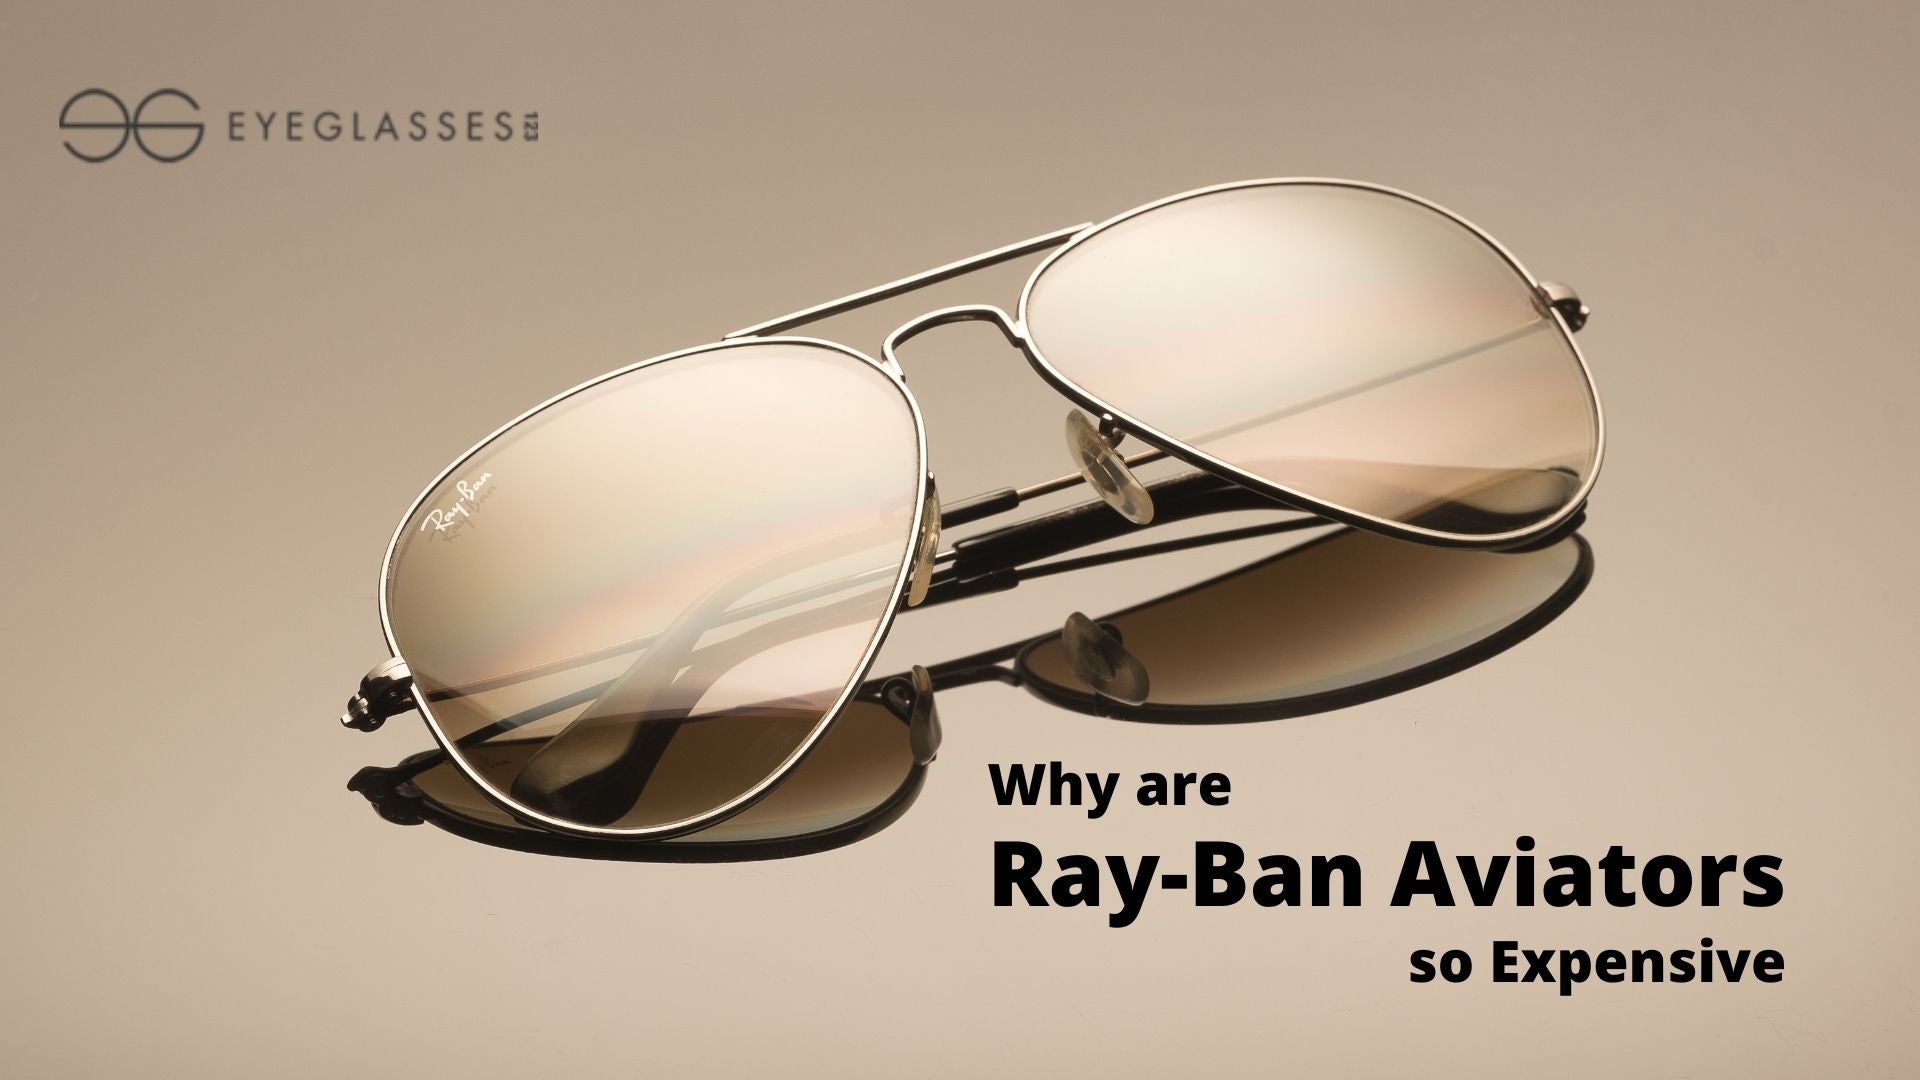 Why are Ray-Ban Aviators so Expensive